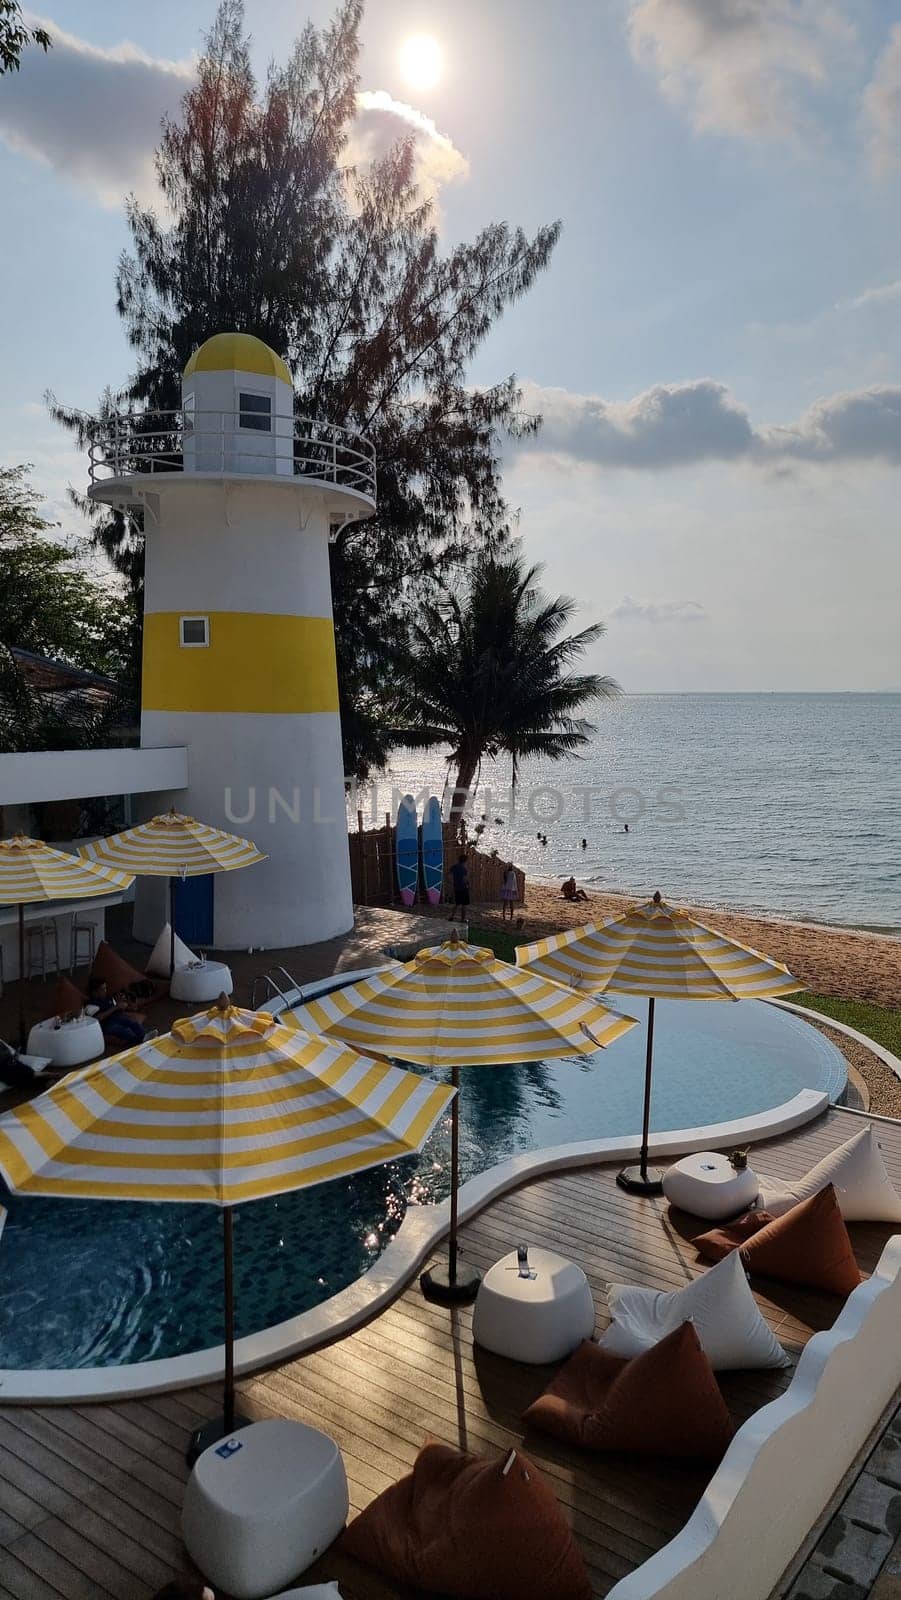 Bangsaray Pattaya Thailand 28 February 2024, Lounge chairs and umbrellas line the deck, offering a relaxing view of the lighthouse against the scenic backdrop.